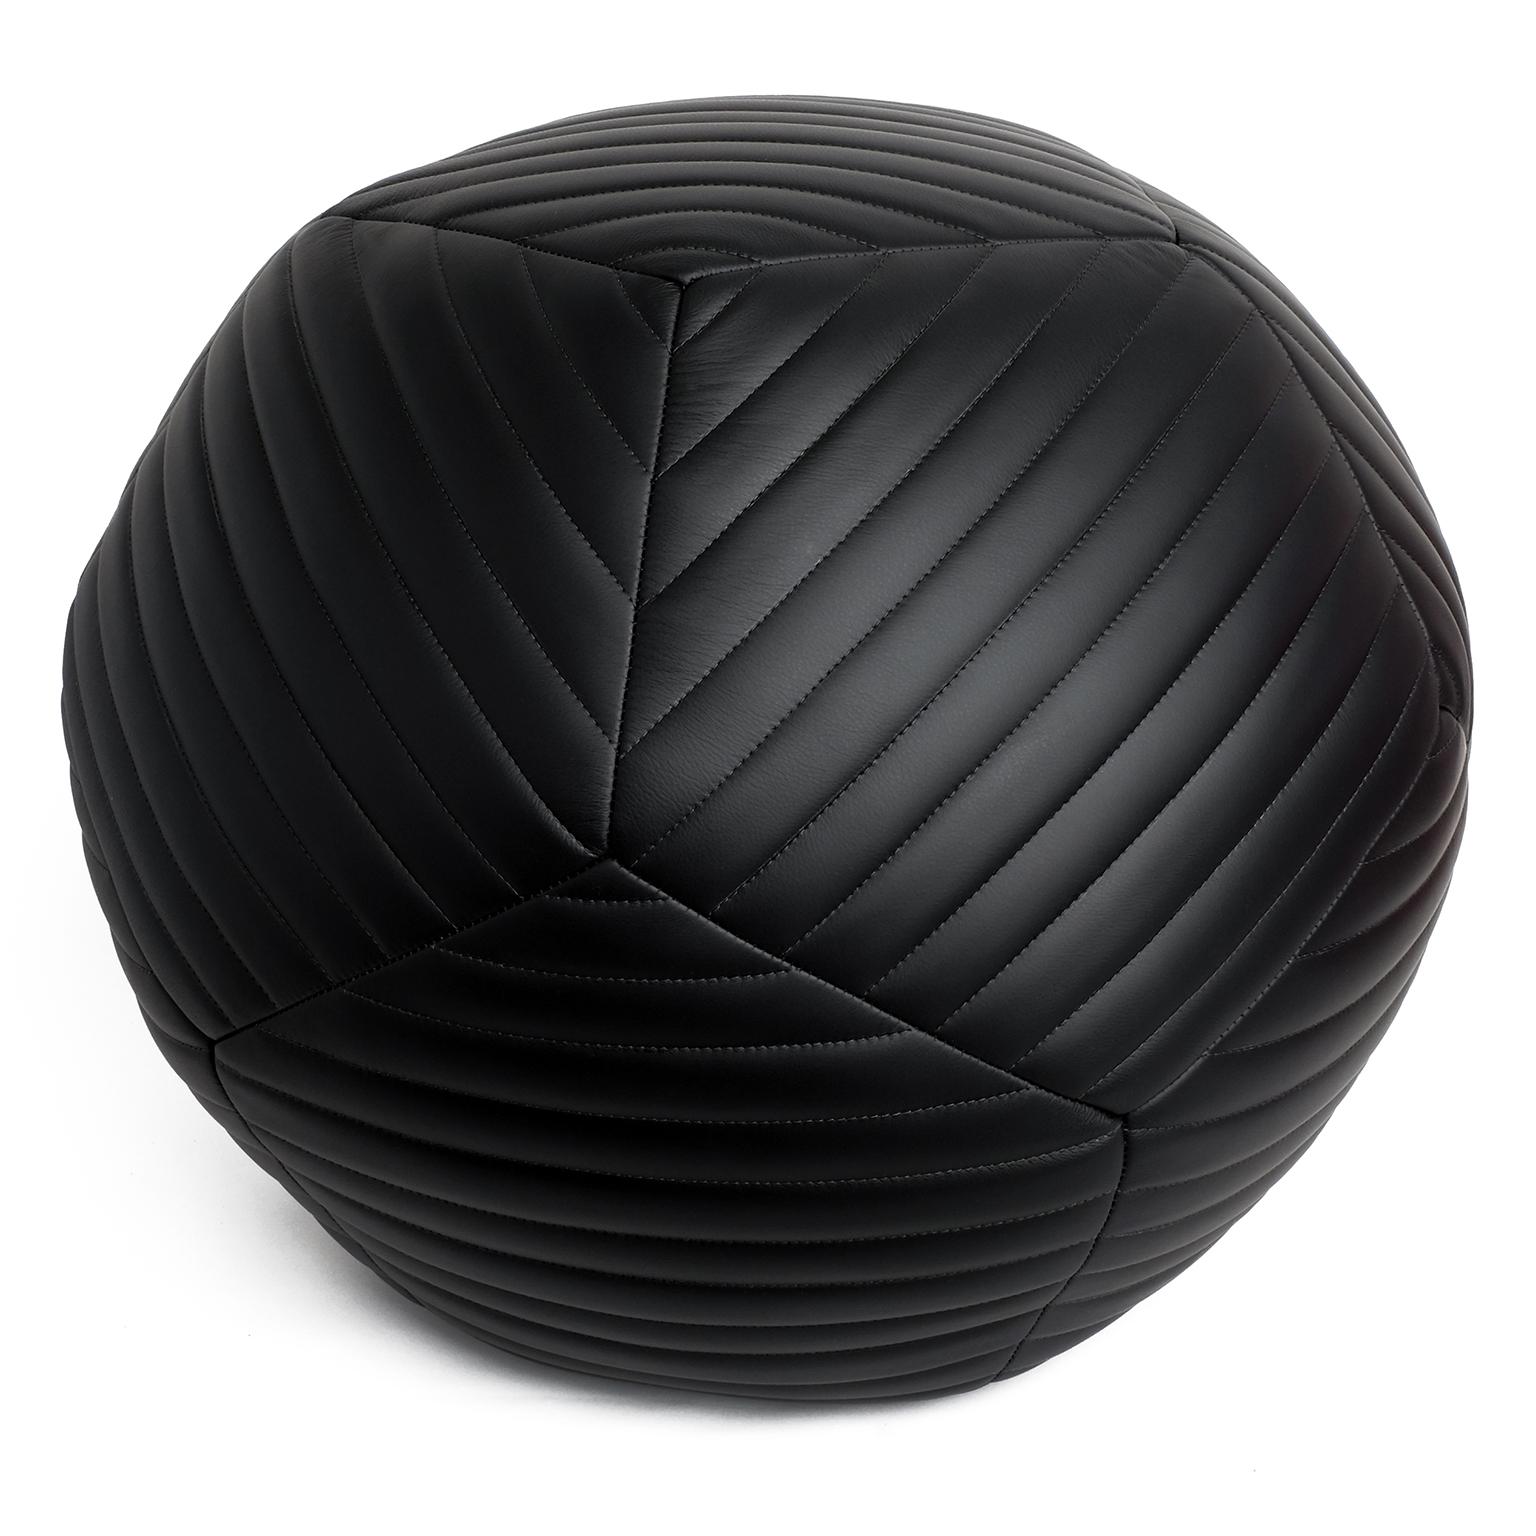 Featured with banded detailing, the Banded Ottoman is inspired by fundamental geometry. These structured and supportive round ball ottomans are designed to function as a traditional leg rest, add a twist to secondary living room or dining table